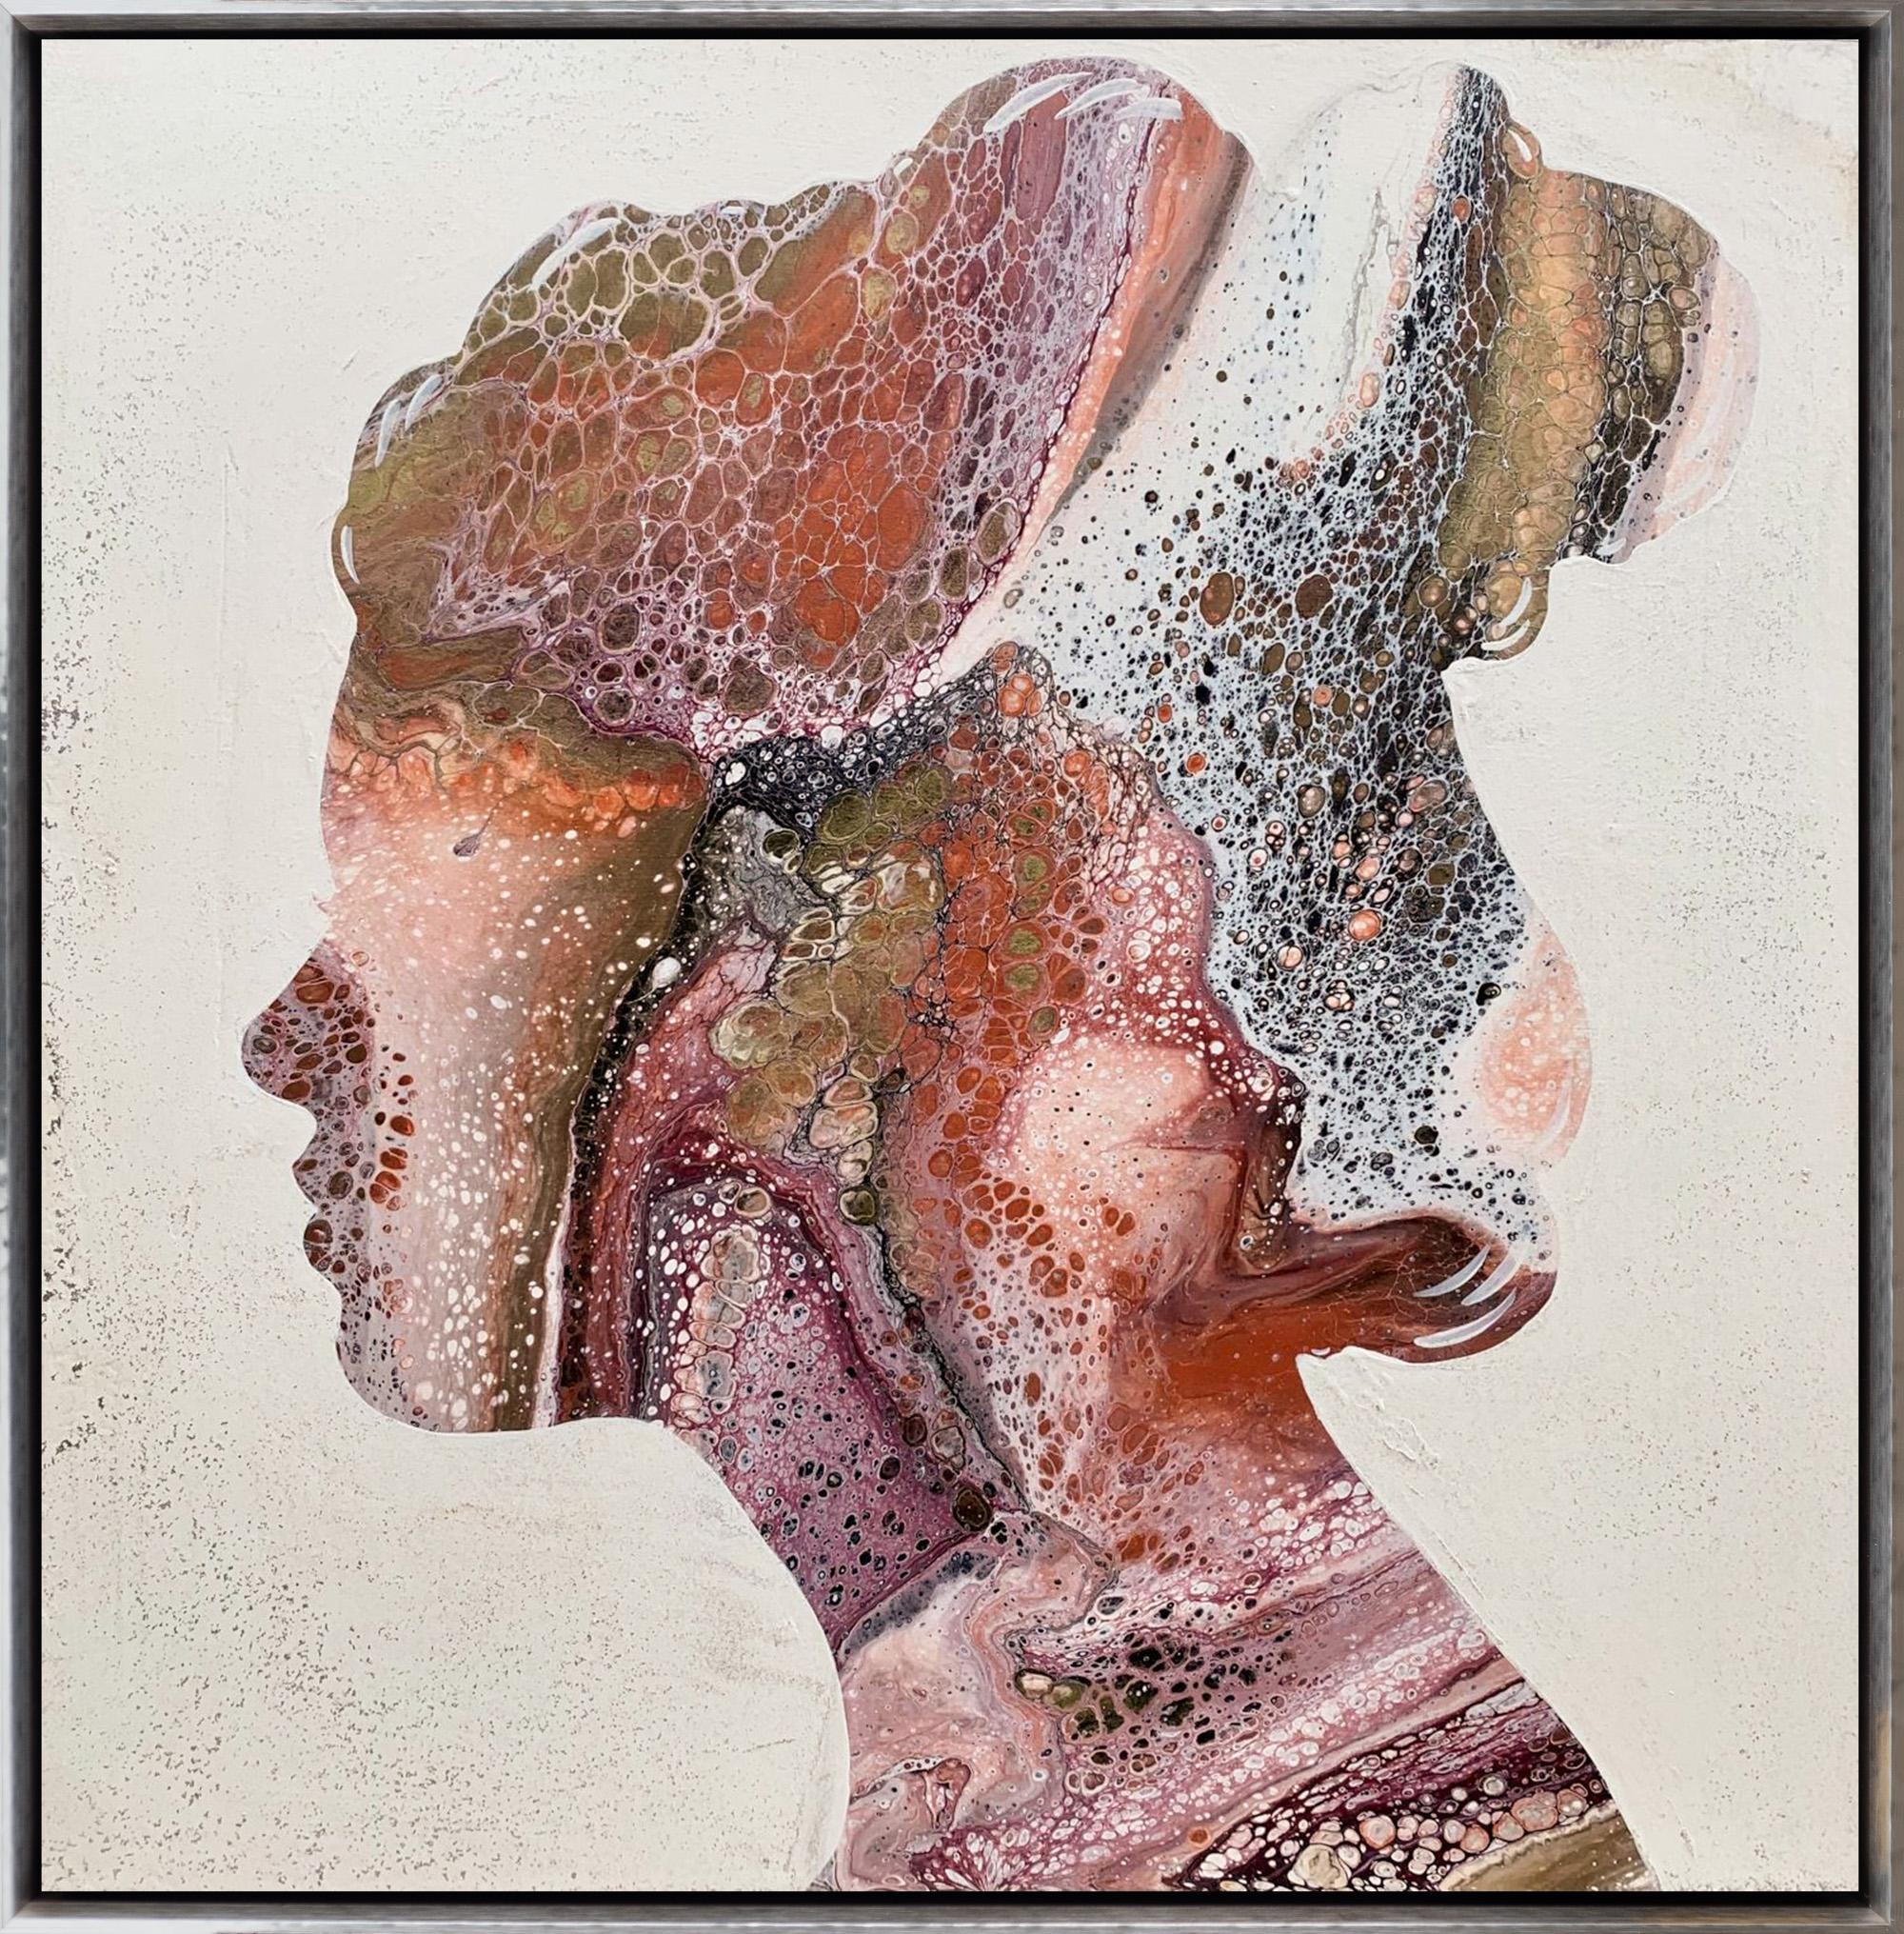 "Flowing Cameo XII" Textured Profile Silhouette with Fluid Detail in Warm Tones - Mixed Media Art by Christopher Peter